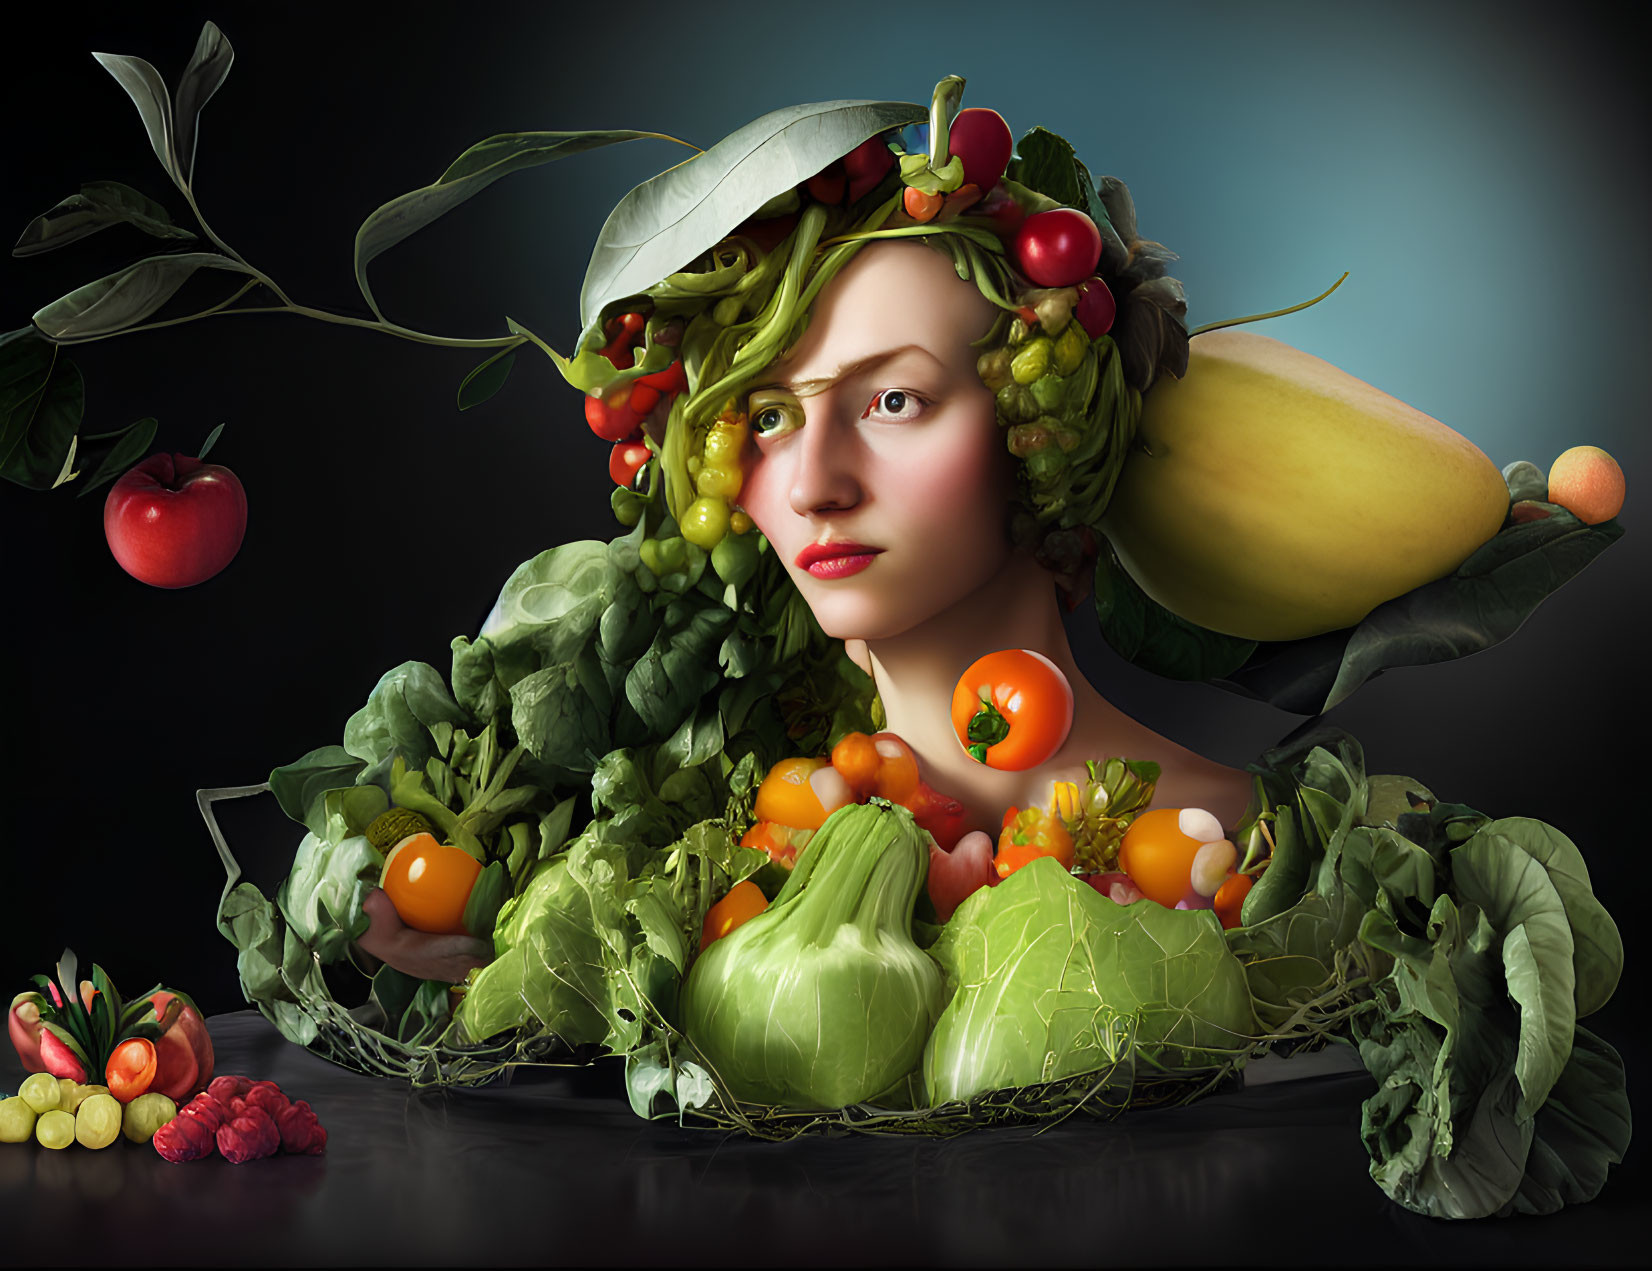 Person adorned with fruits and vegetables symbolizing bountiful harvest